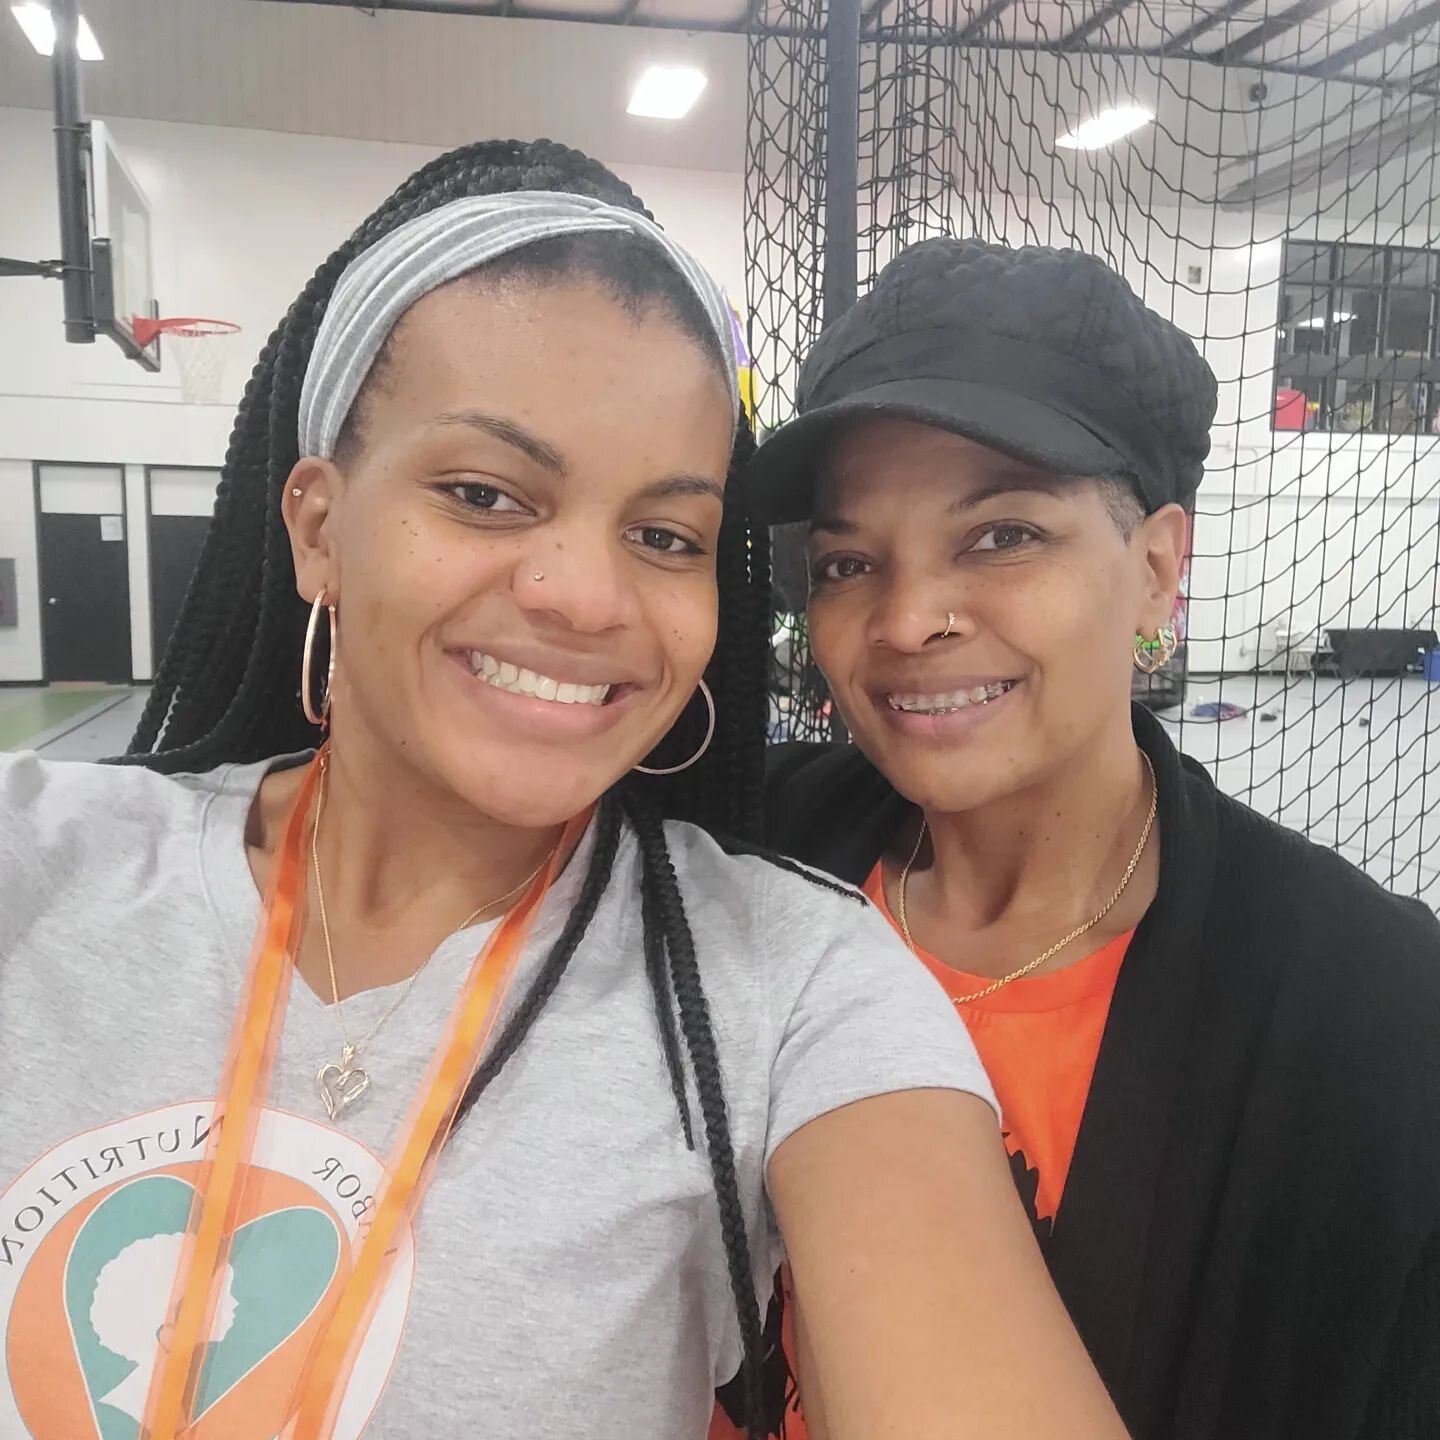 Another successful event with @celebrateone_columbus. Had my bestie and support system with me. Love my mom!

#doulasupport #columbusdoula #pregnancynutrition